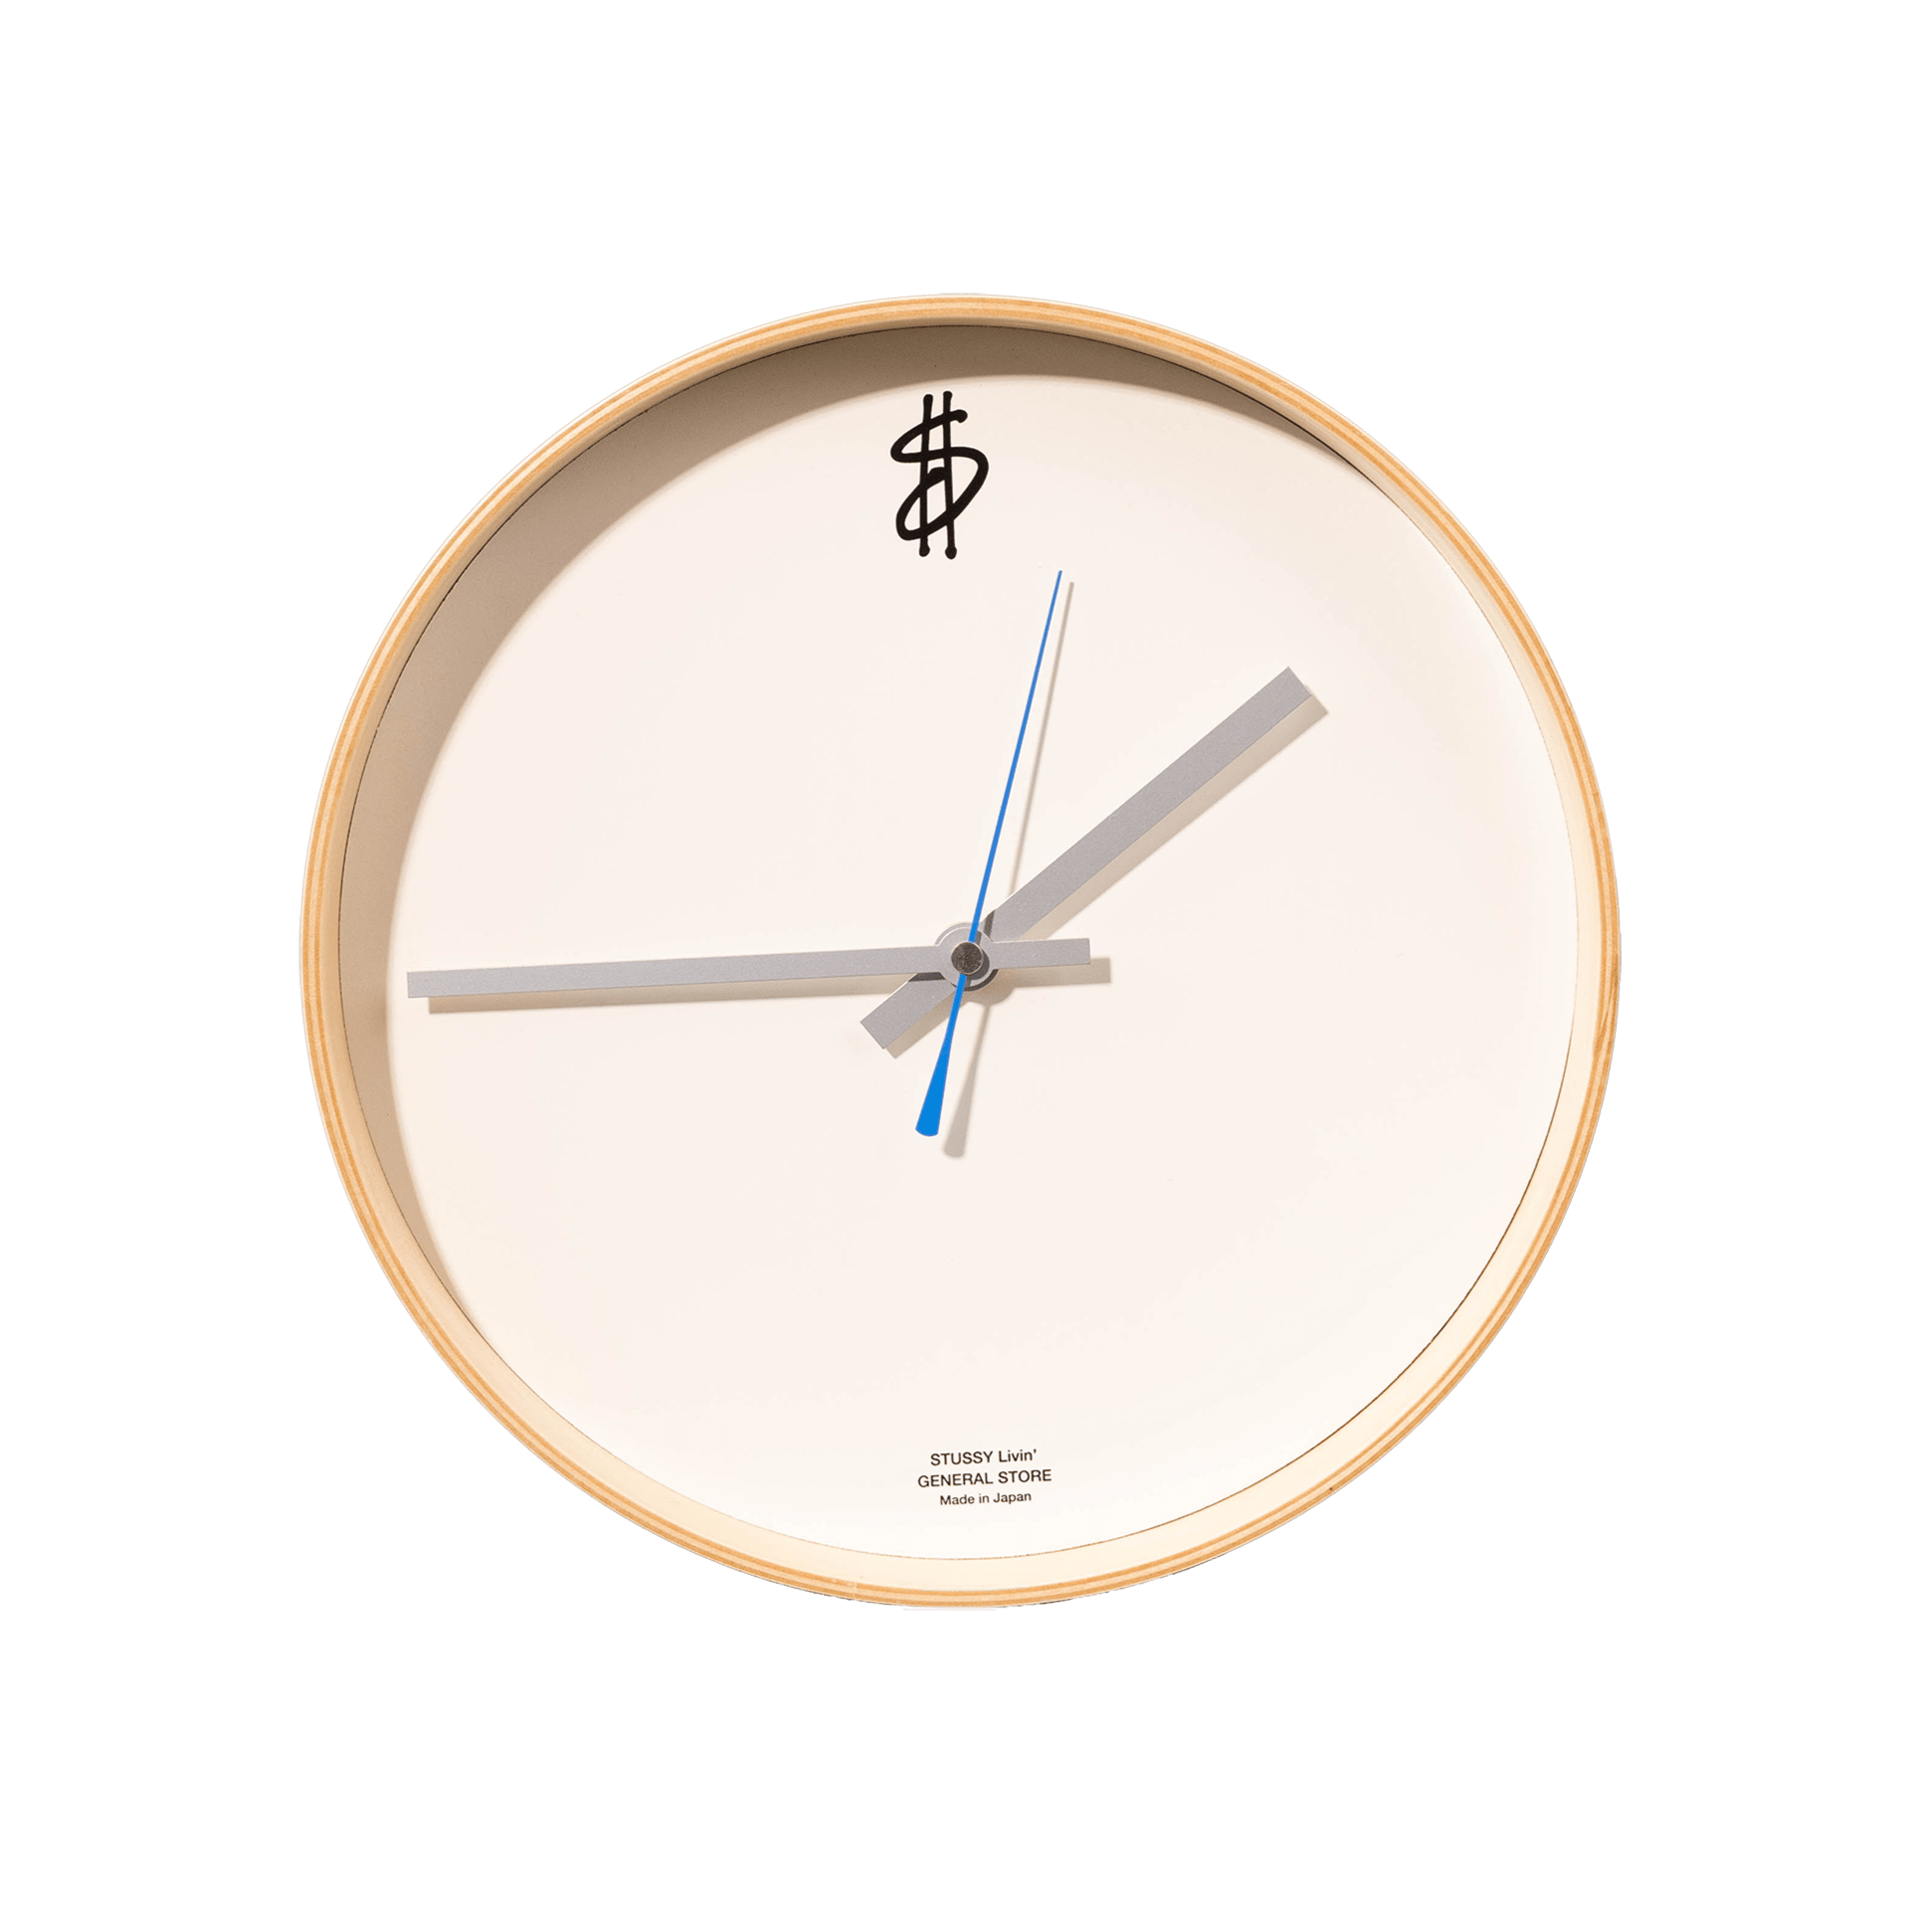 Saito Wood - STUSSY Livin'General Store | “Time is money” Wall Clock, 2017